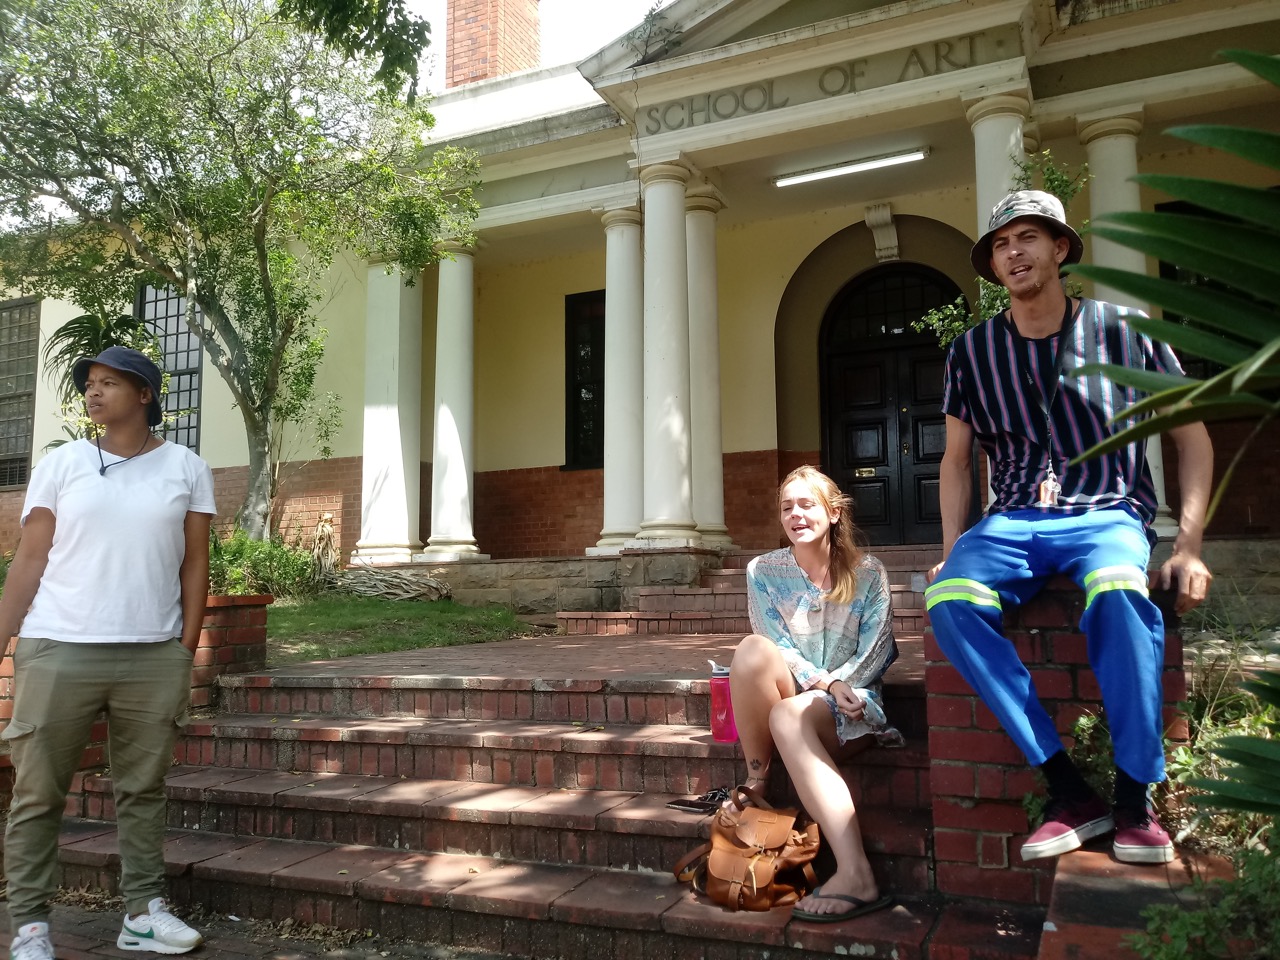 Phila Phaliso and Emily Lacon-Allin sit with Mook Lion in front of the fine art department of Rhodes University. Phila is a master’s student in fine art and the tutor of the minor stream students. Emily is also a master’s student who wishes she could be working on the mural.